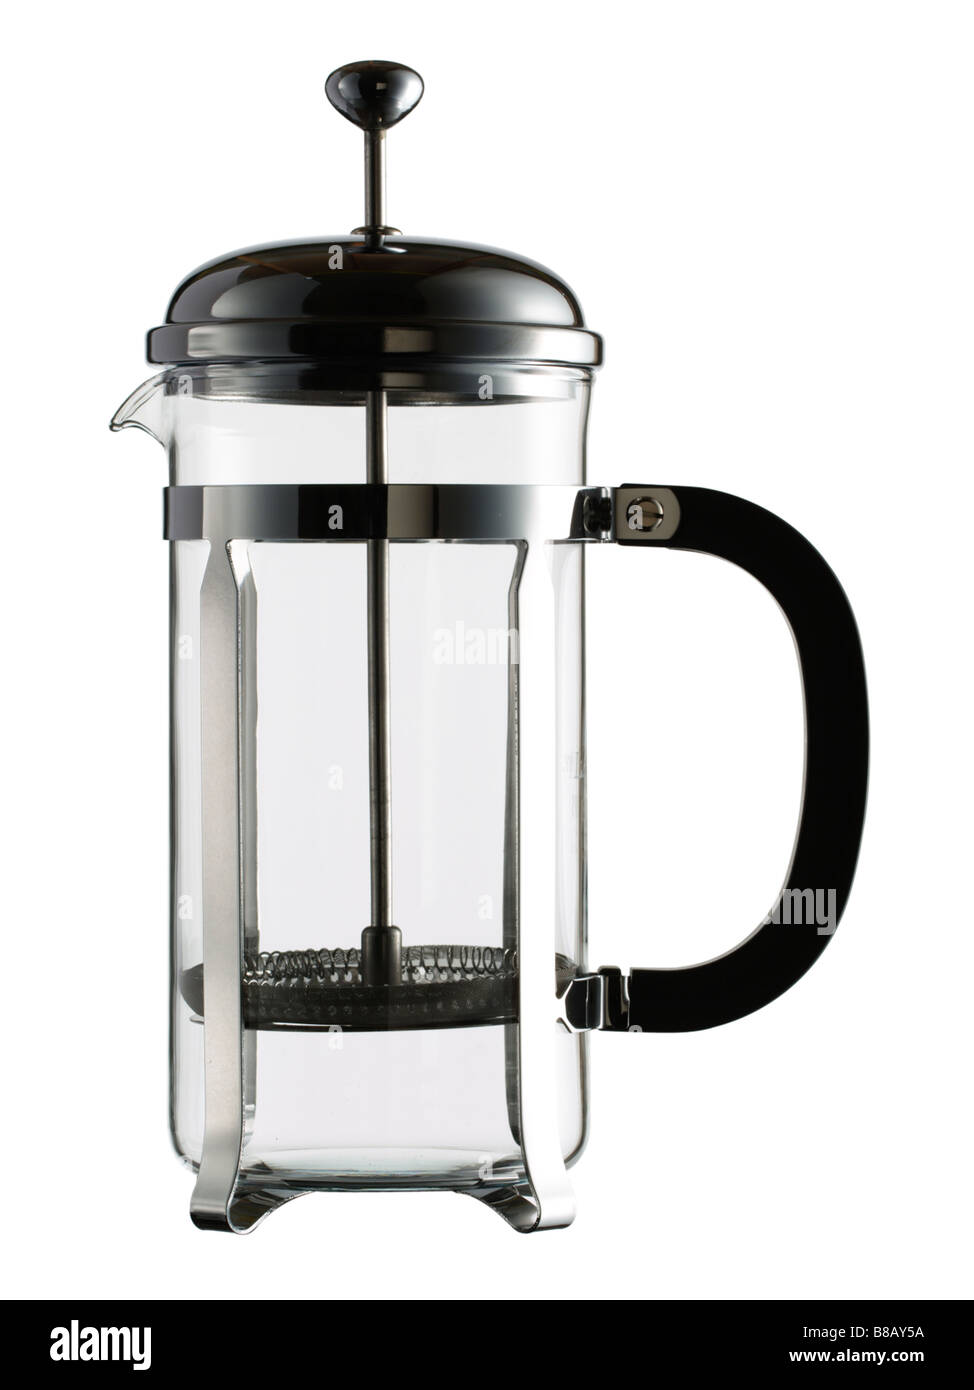 Cafetiere Stock Photo